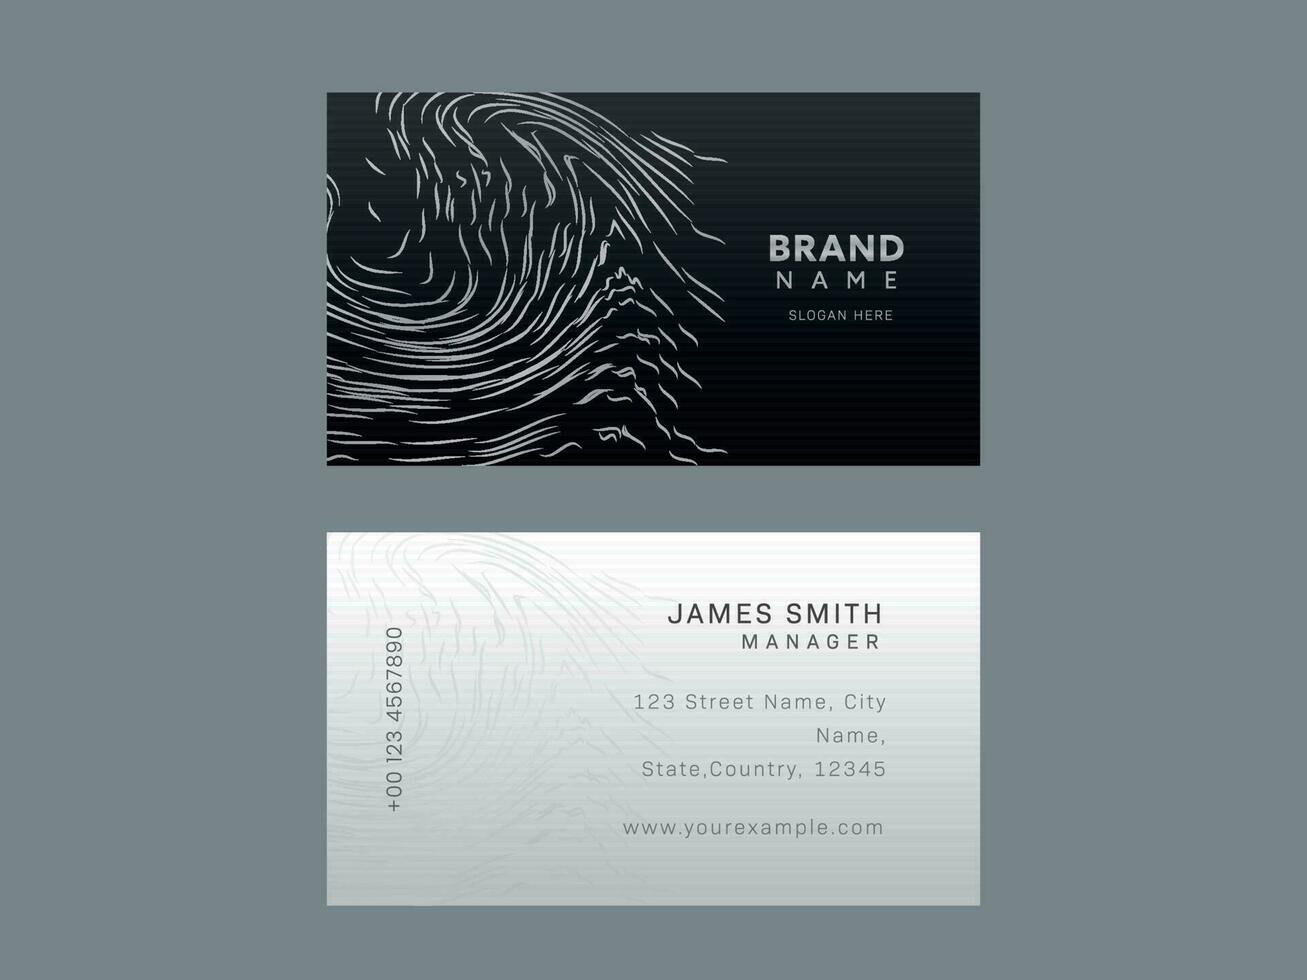 Horizontal Business Card Design In Black And White Color. vector